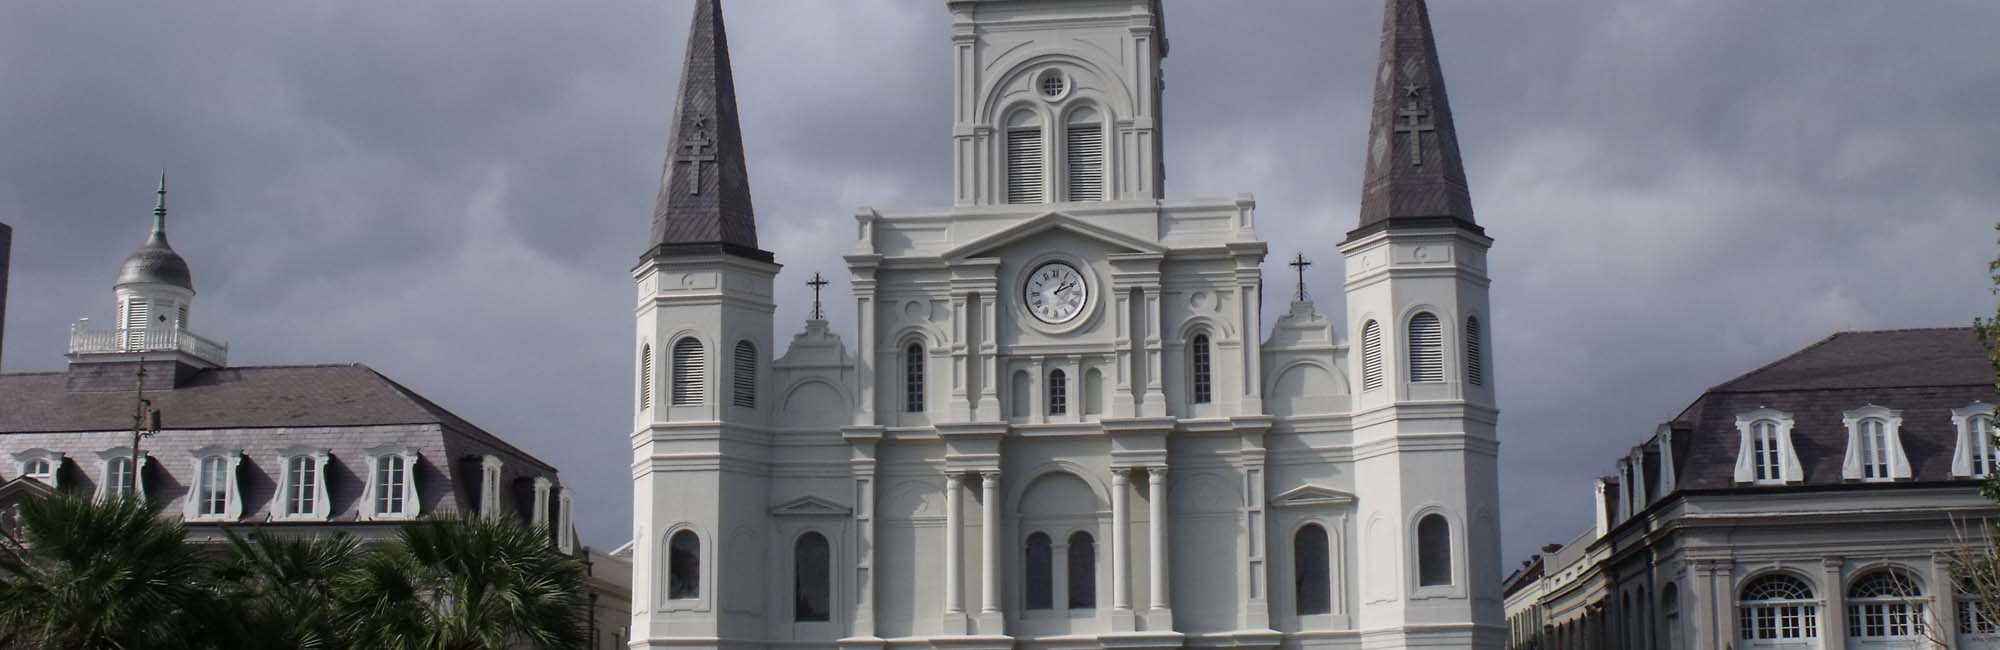 St. Louis Cathedral, French Quarter